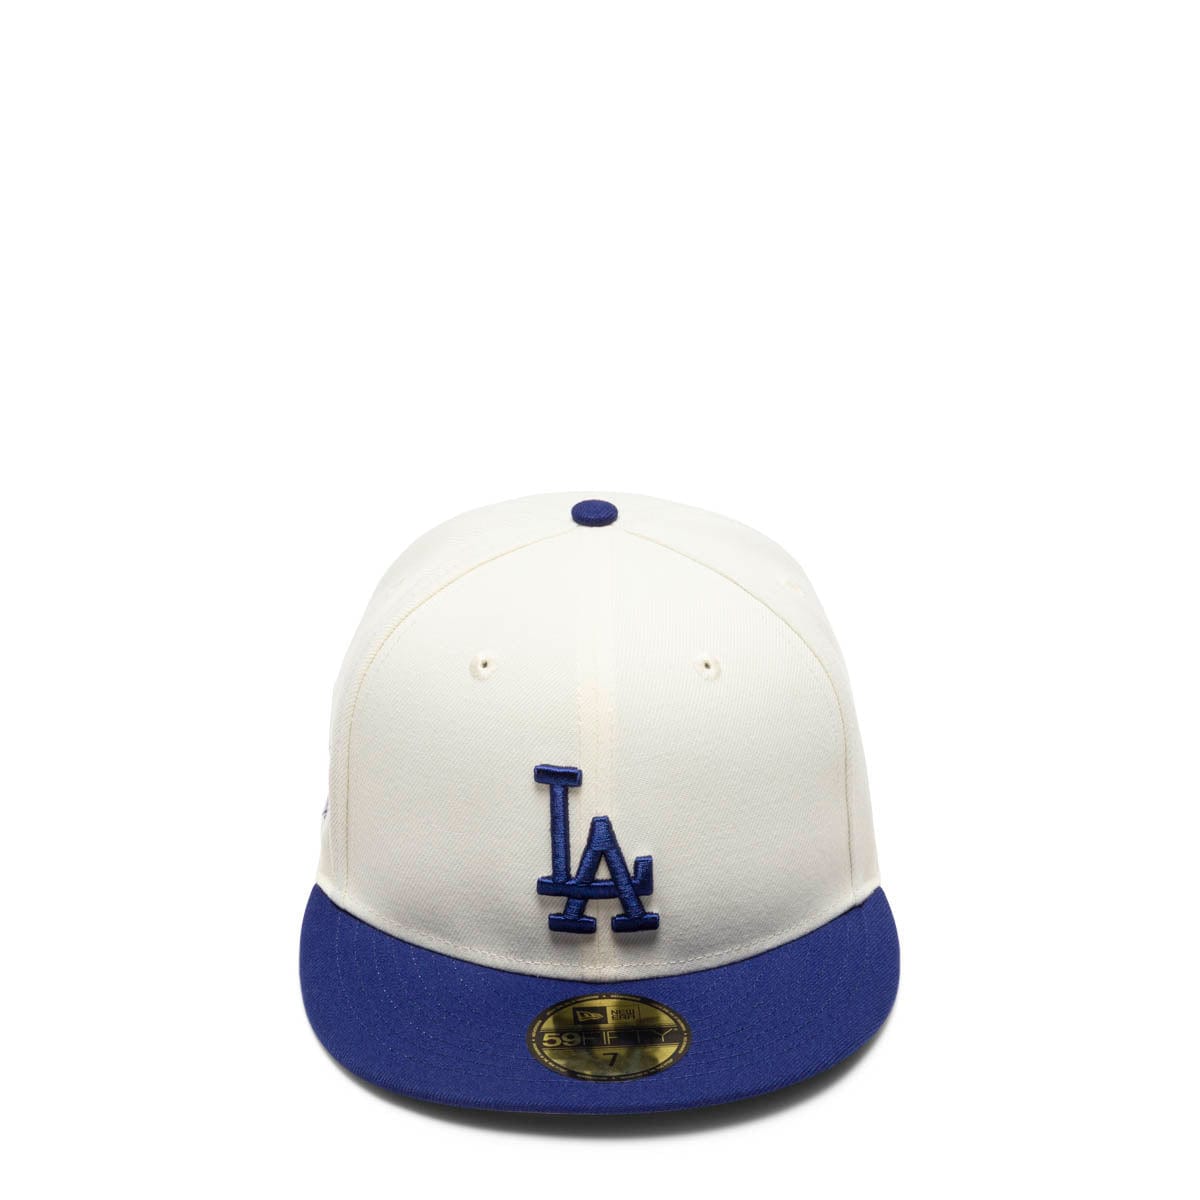 Los Angeles Dodgers CITY CONNECT ONFIELD Hat by New Era